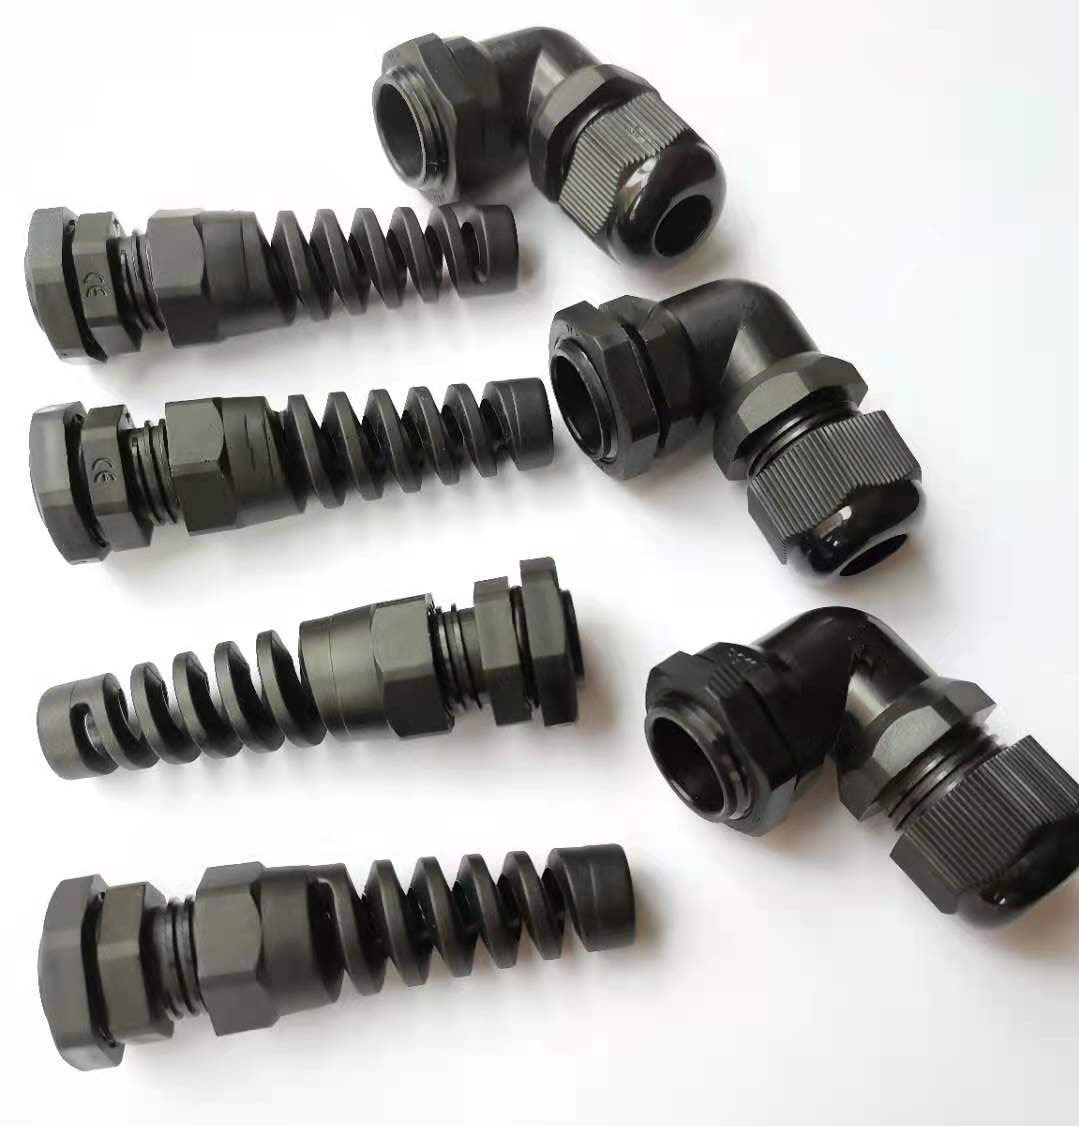 IP68 P/M style nylon cable glands with spiral flex protector